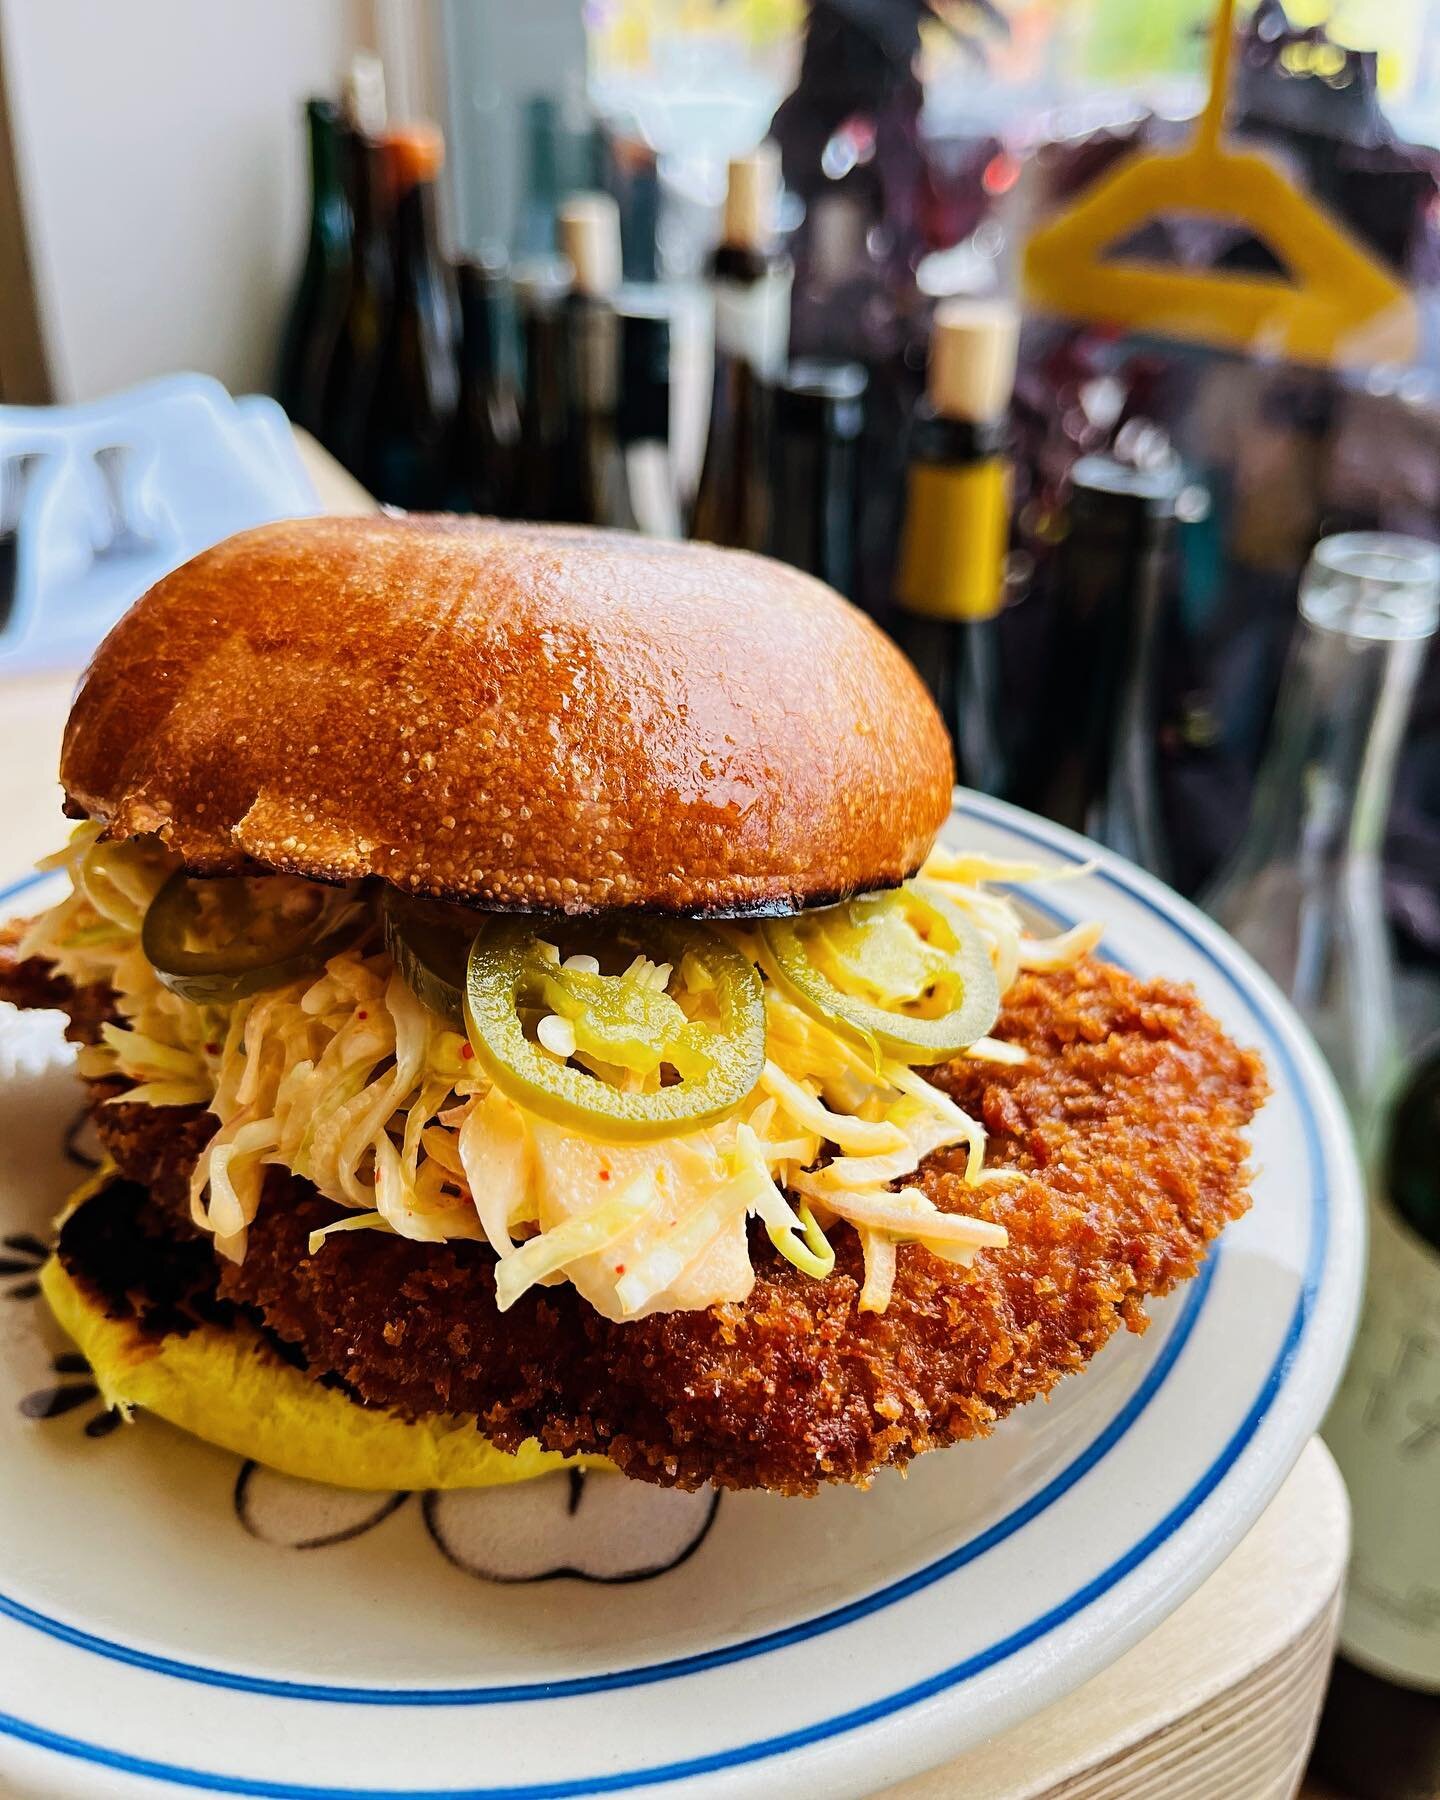 SCHNITZEL IS BAAACKKKK! 

🐖🐖🐖🐖🐖🐖🐖🐖🐖🐖🐖🐖🐖

Pork schnitzel sandwich is back this time with kimchi mayo, creamy slaw, and some jalape&ntilde;os we pickled this summer from @terramorfarm !

Large and in charge! Spicy, but not too spicy, ya kn